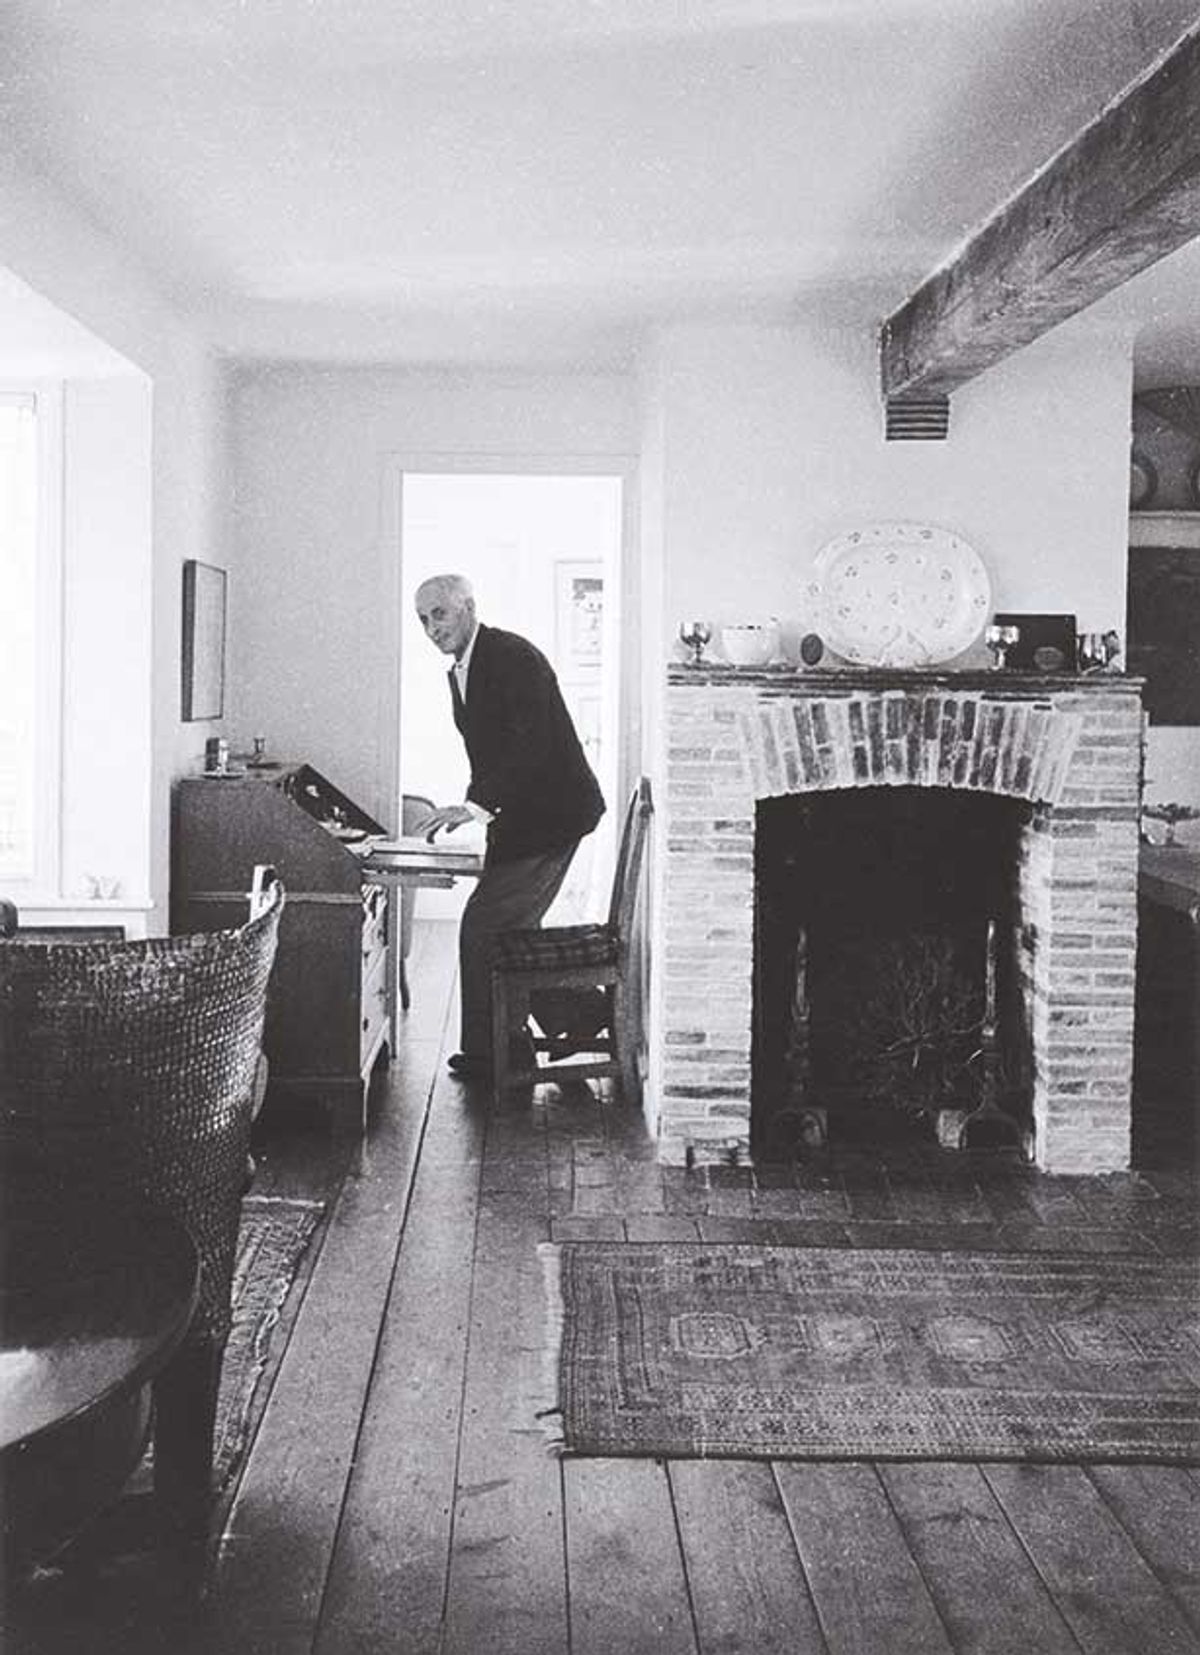 Jim Ede in the dining room at Kettle’s Yard, University of Cambridge

Photo: public domain
